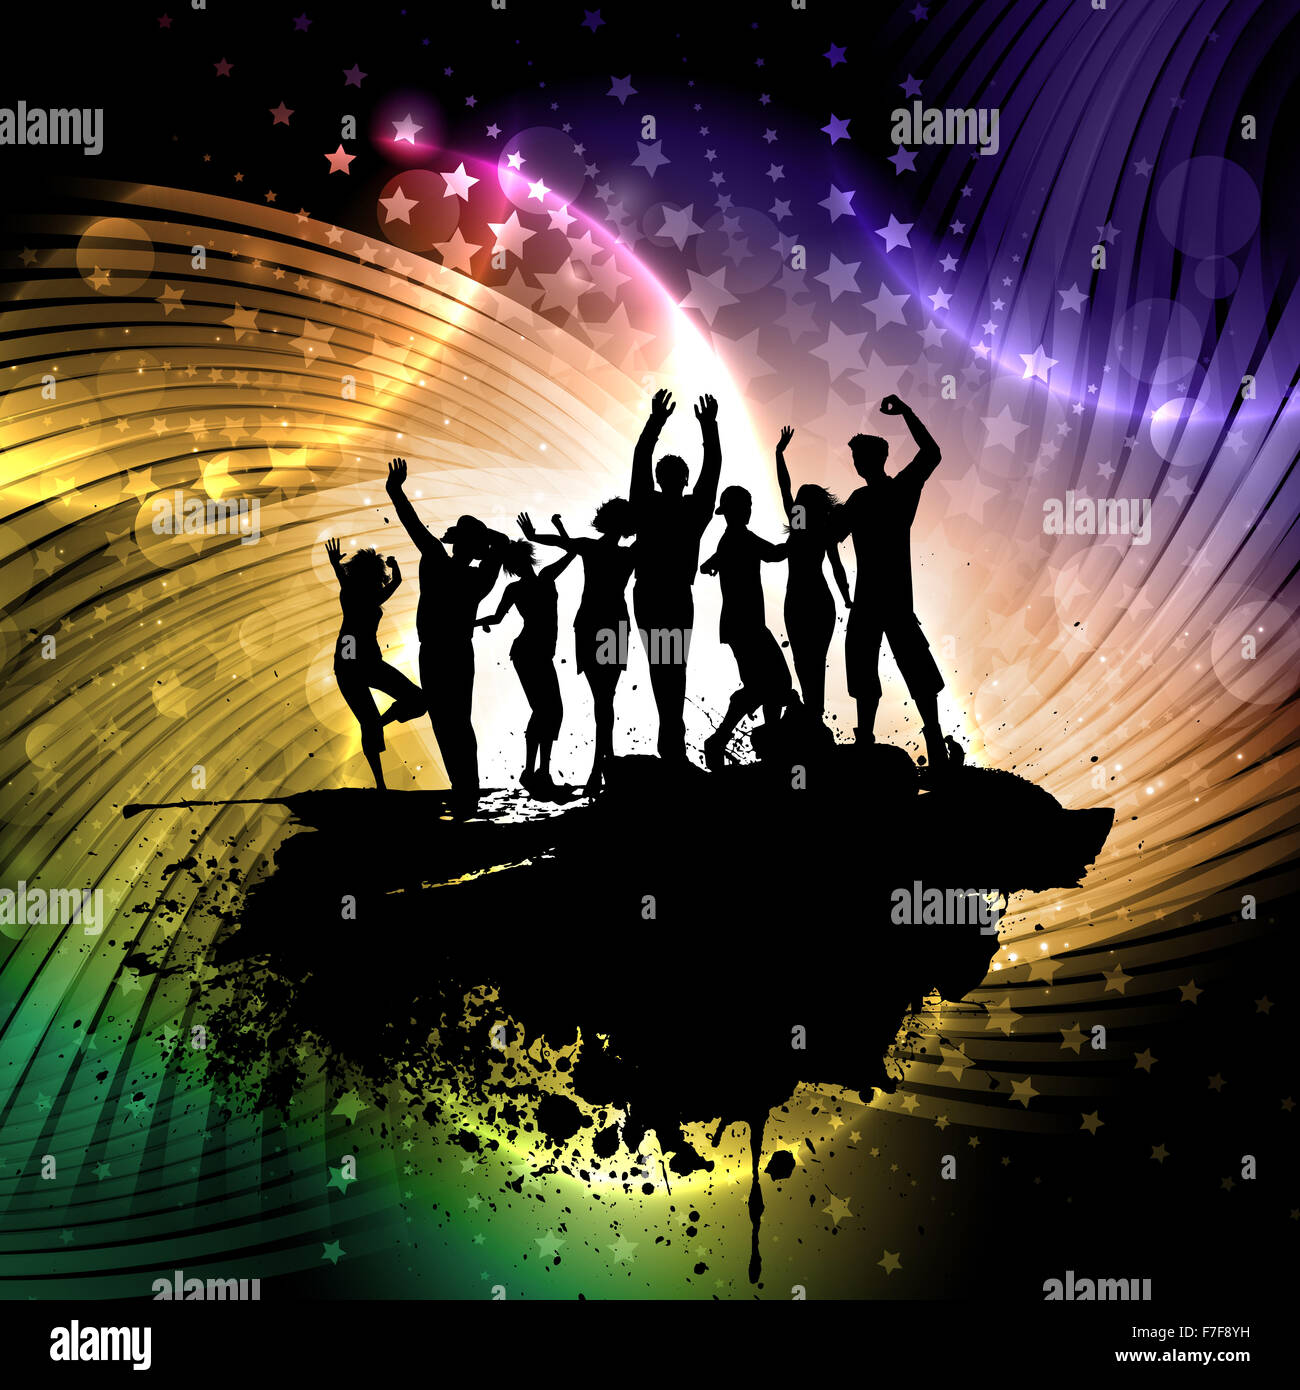 Grunge style background with silhouettes of people dancing Stock Photo